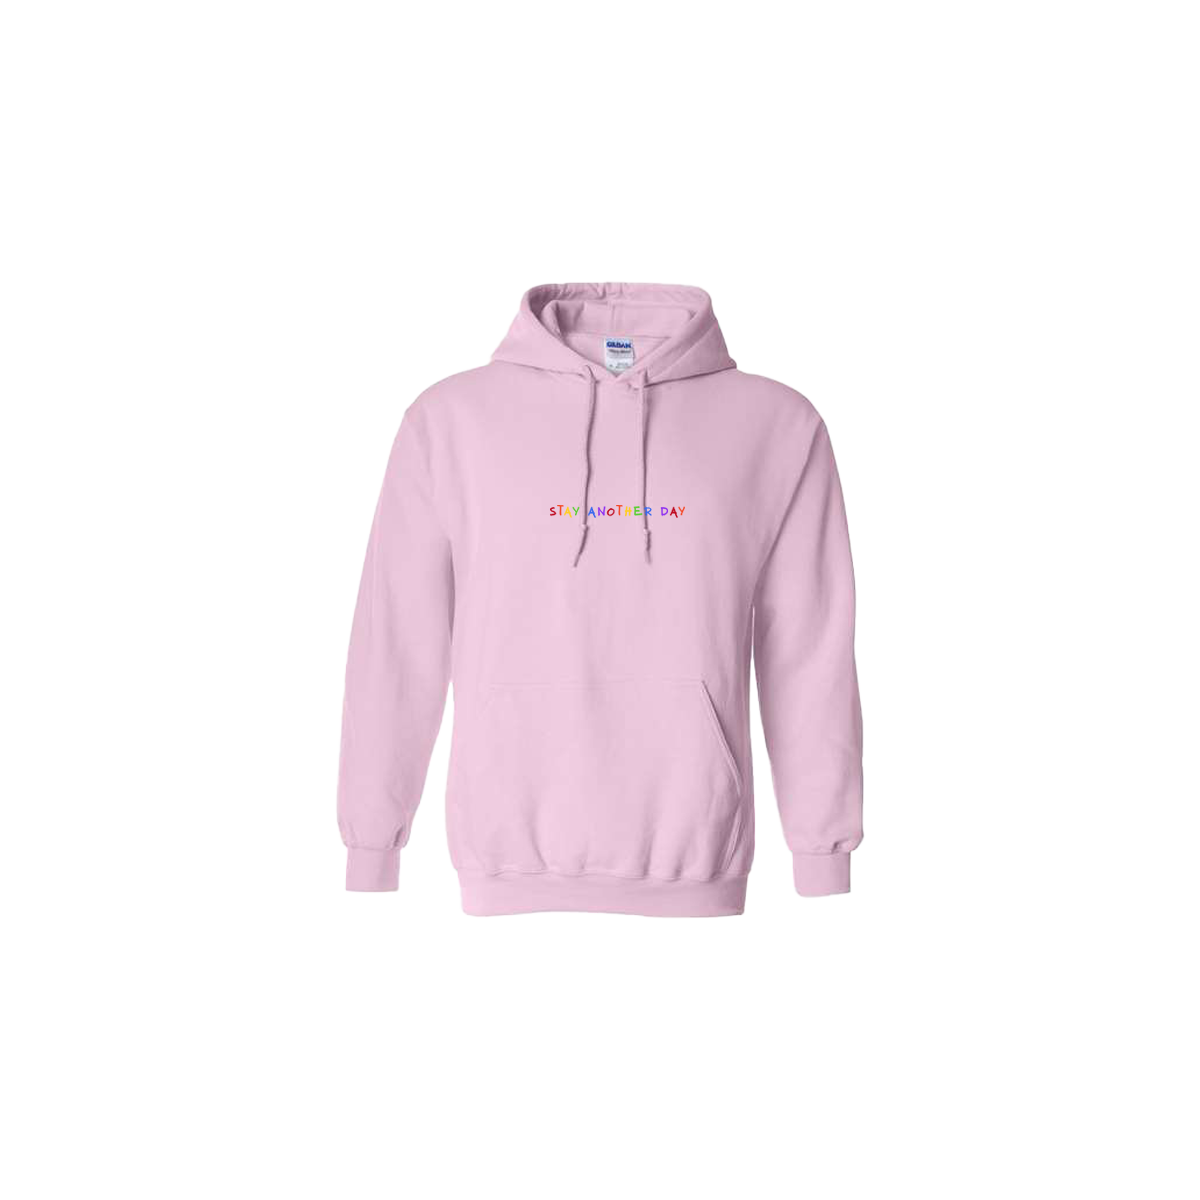 Stay Another Day Rainbow Embroidered Light Pink Hoodie - Mental Health Awareness Clothing